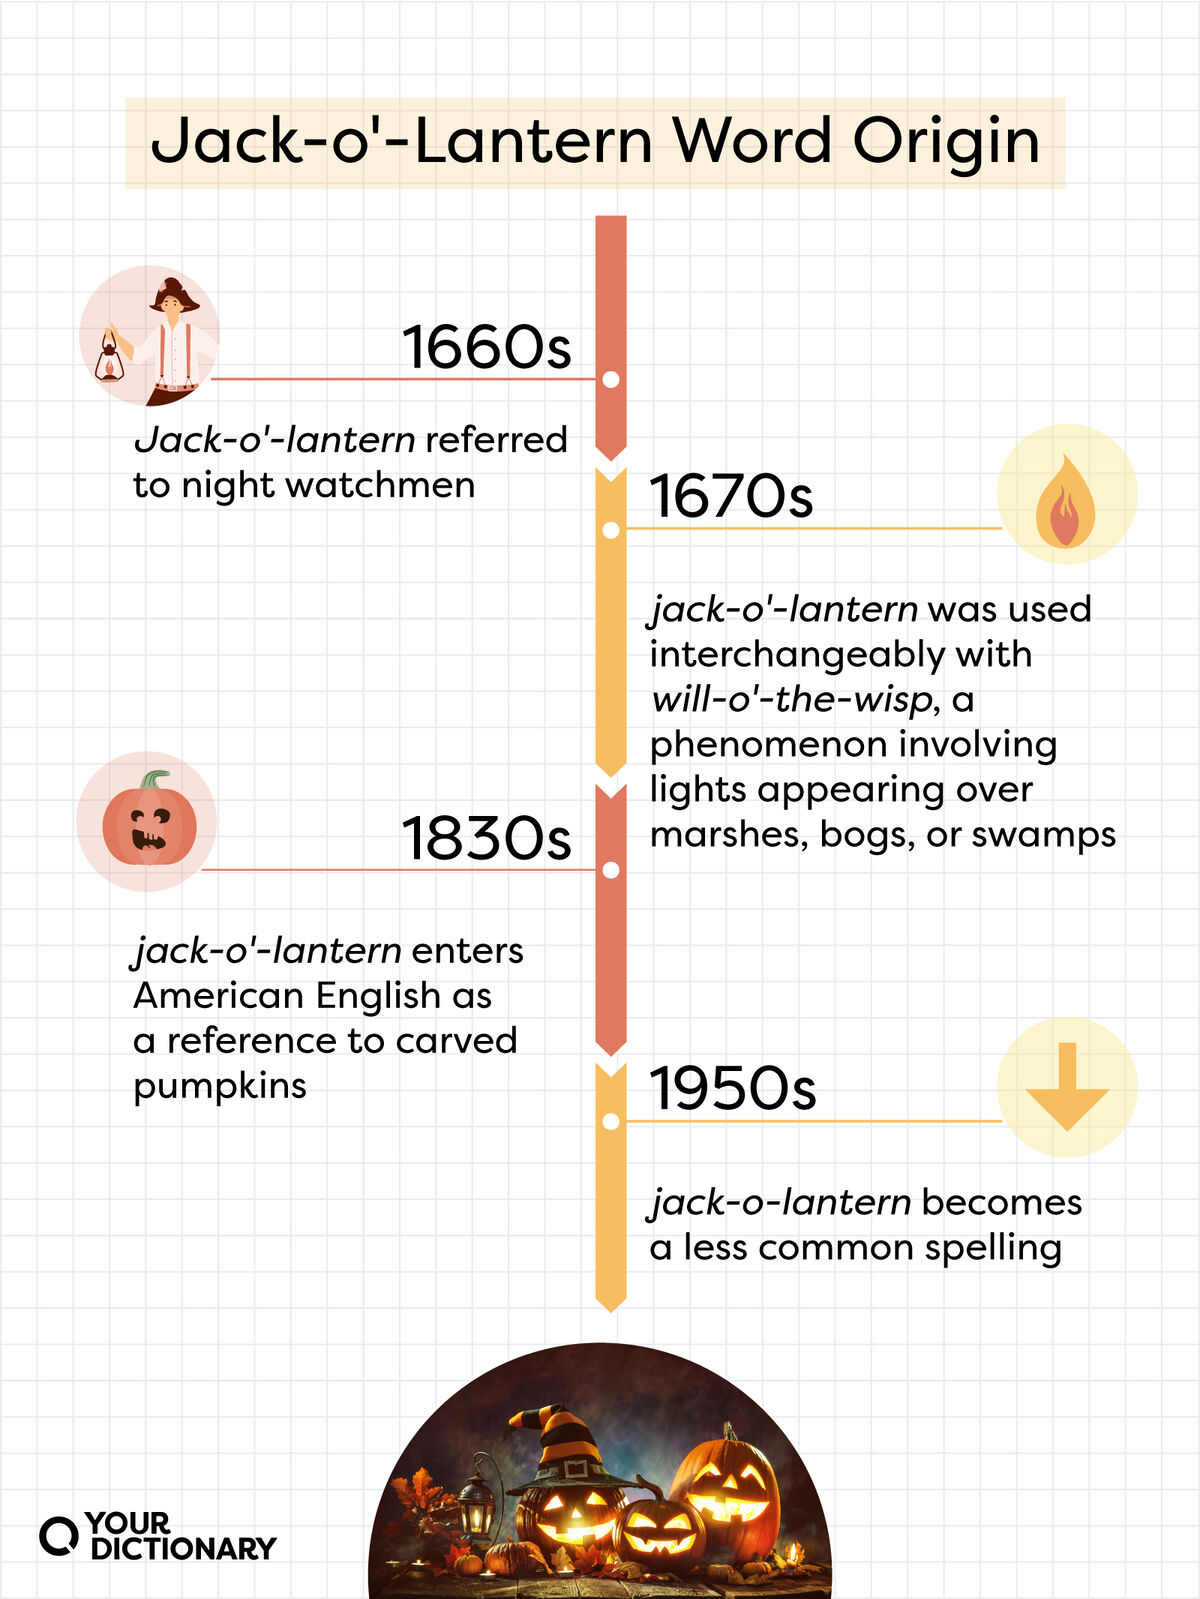 Timeline of the origin of the term jack-o'-lantern explained in detail in the article as well as a callout to the 1950s when "jack-o-lantern became a less common spelling.